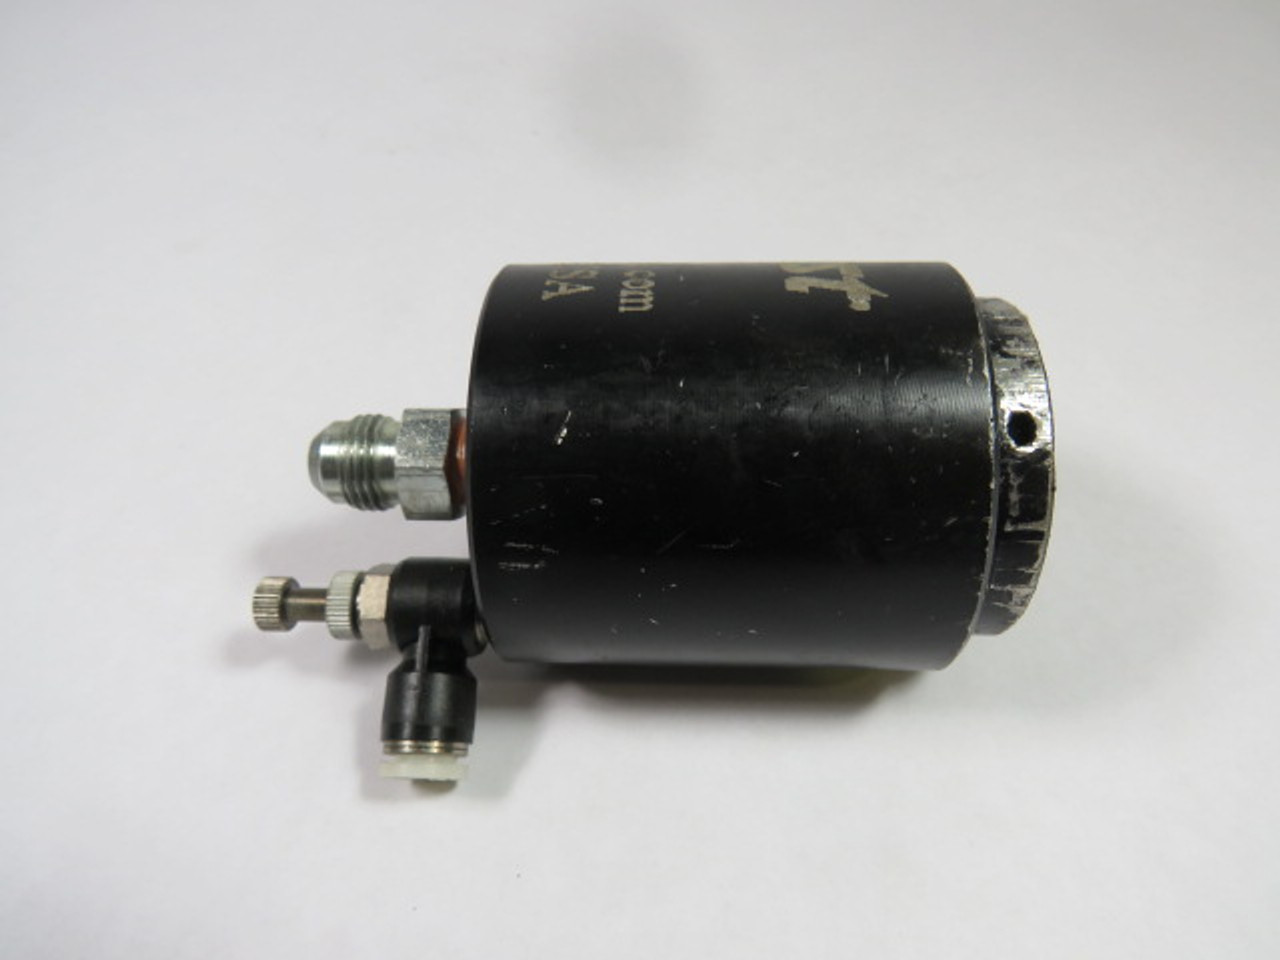 Fastest Inc. FE1 Pneumatic Connector 1/4" NPT USED